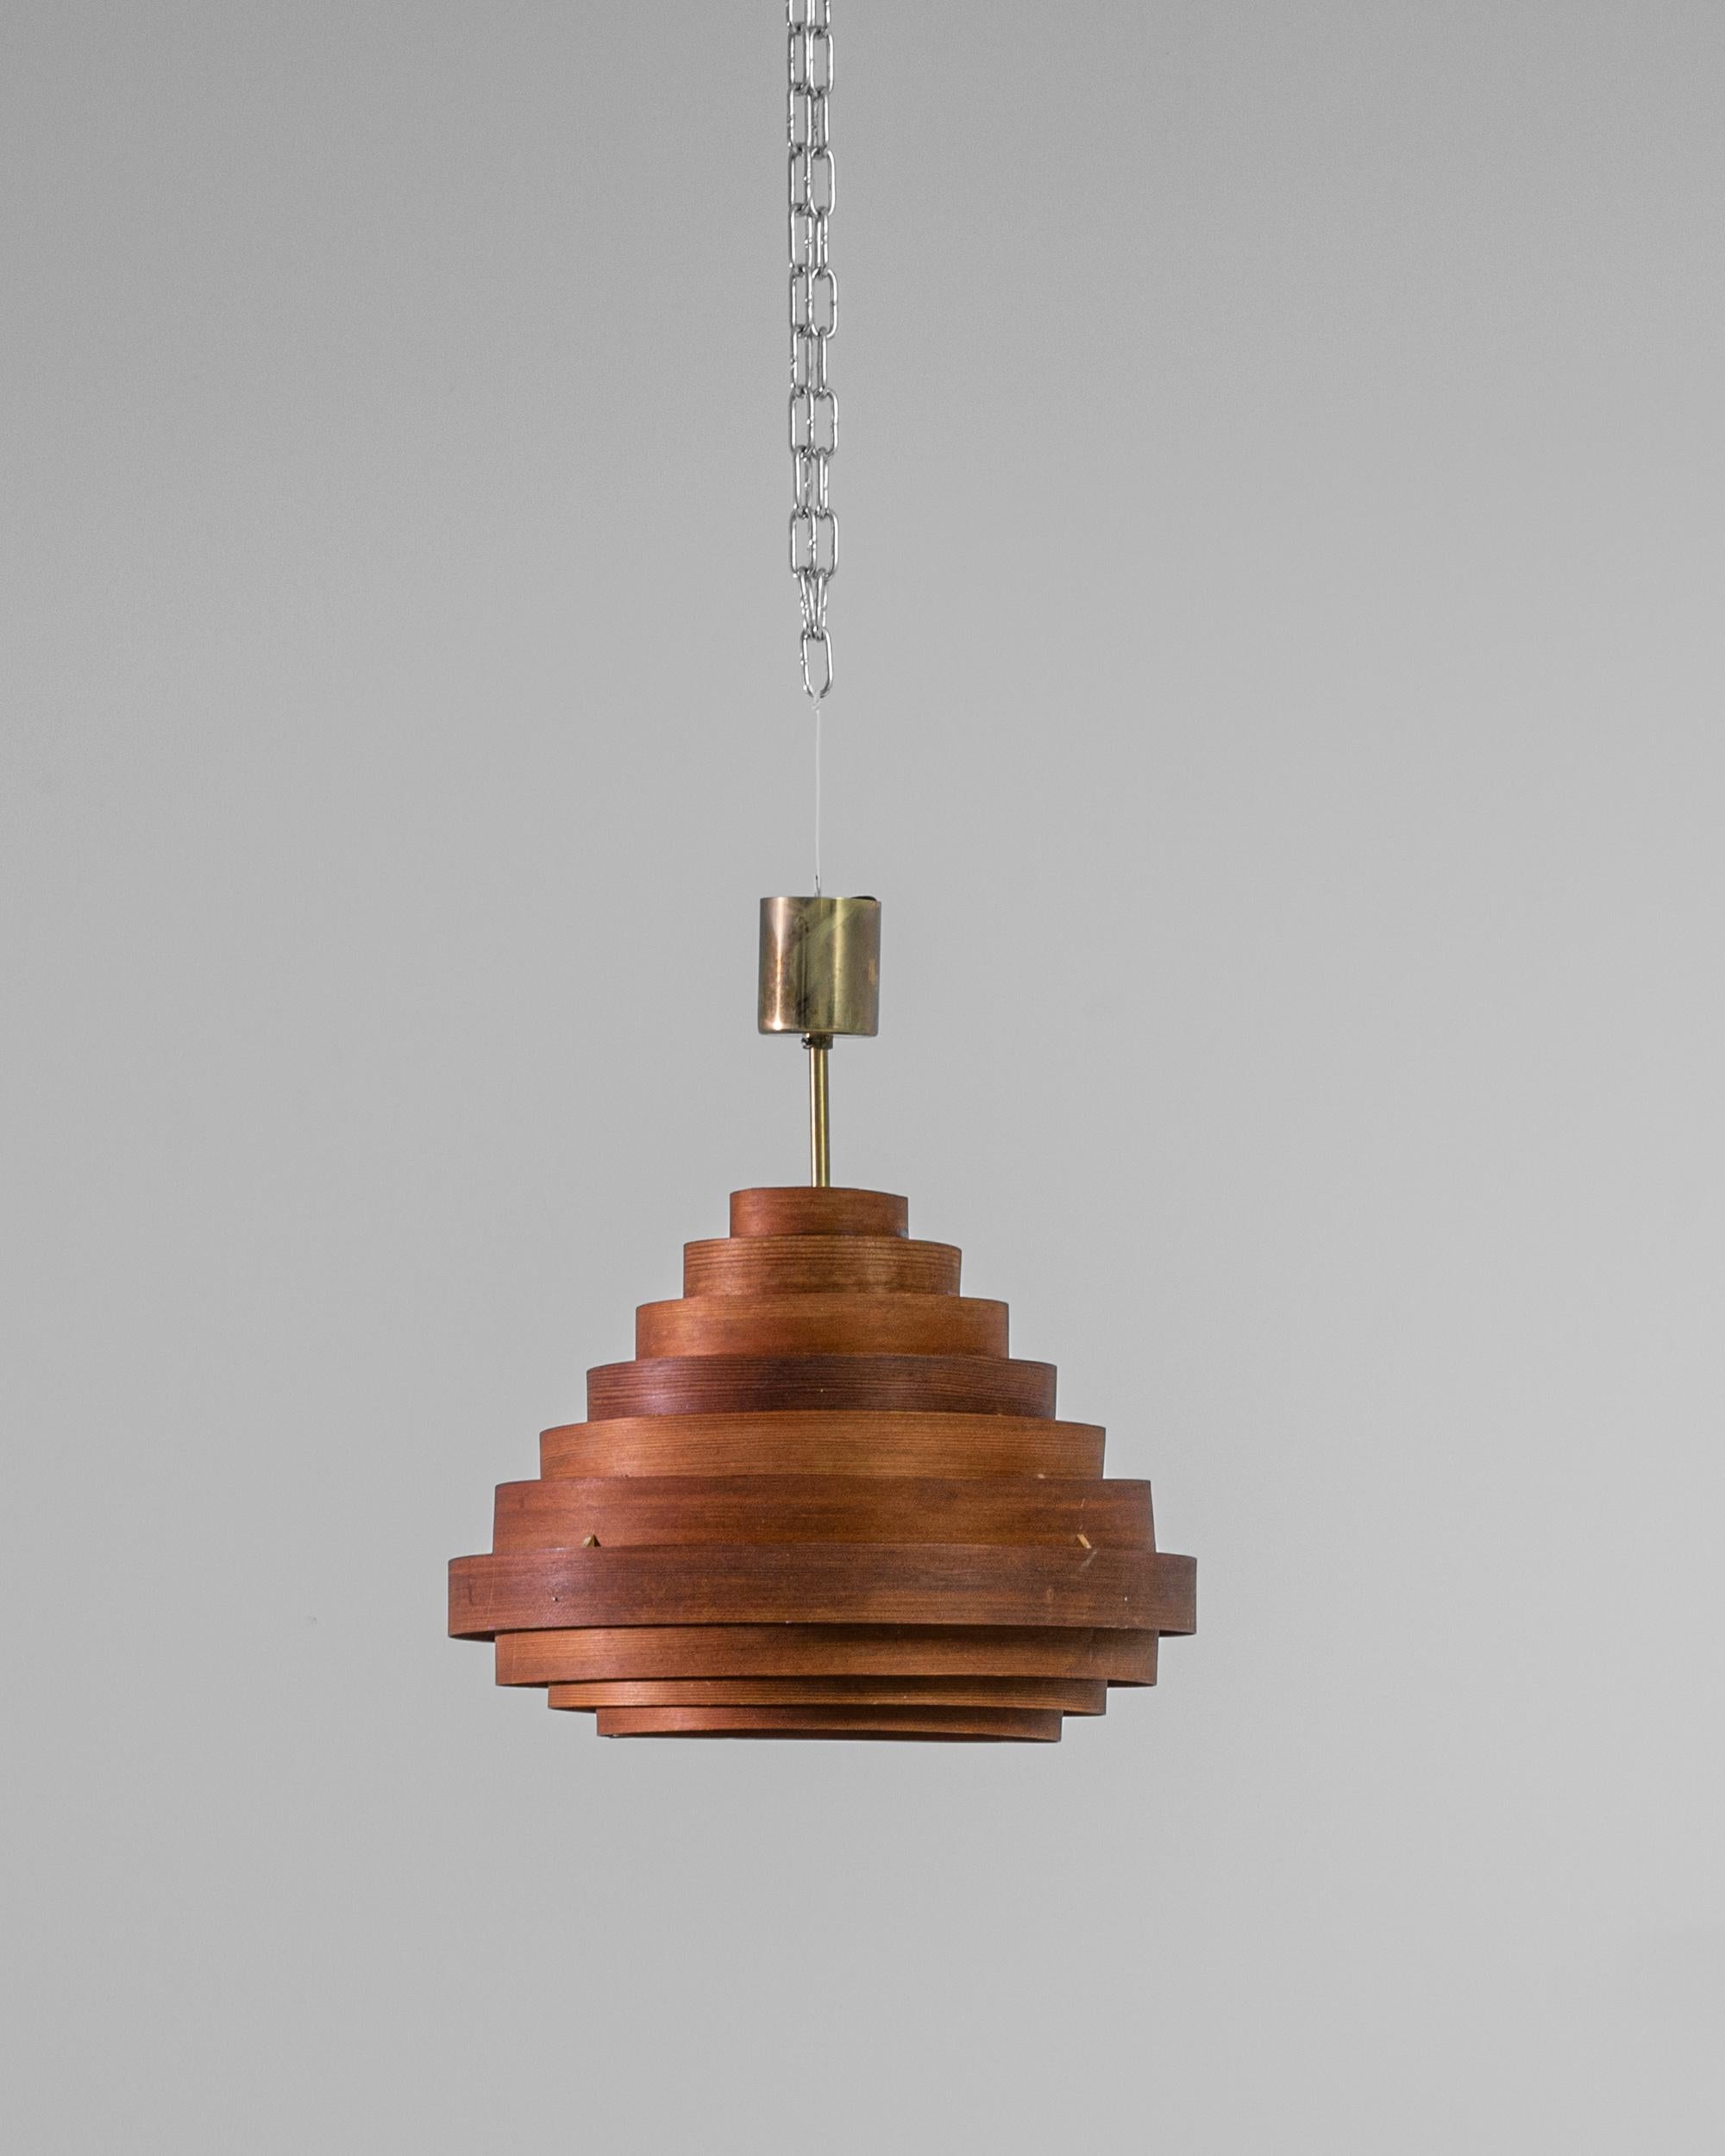 A mid-20th century wooden pendant lamp, produced in Denmark. This vintage lamp is made with a bentwood pendant shade and a metal canopy with gilded reflections. Aligned with the tradition of modern nordic design, this lamp lays full focus on the